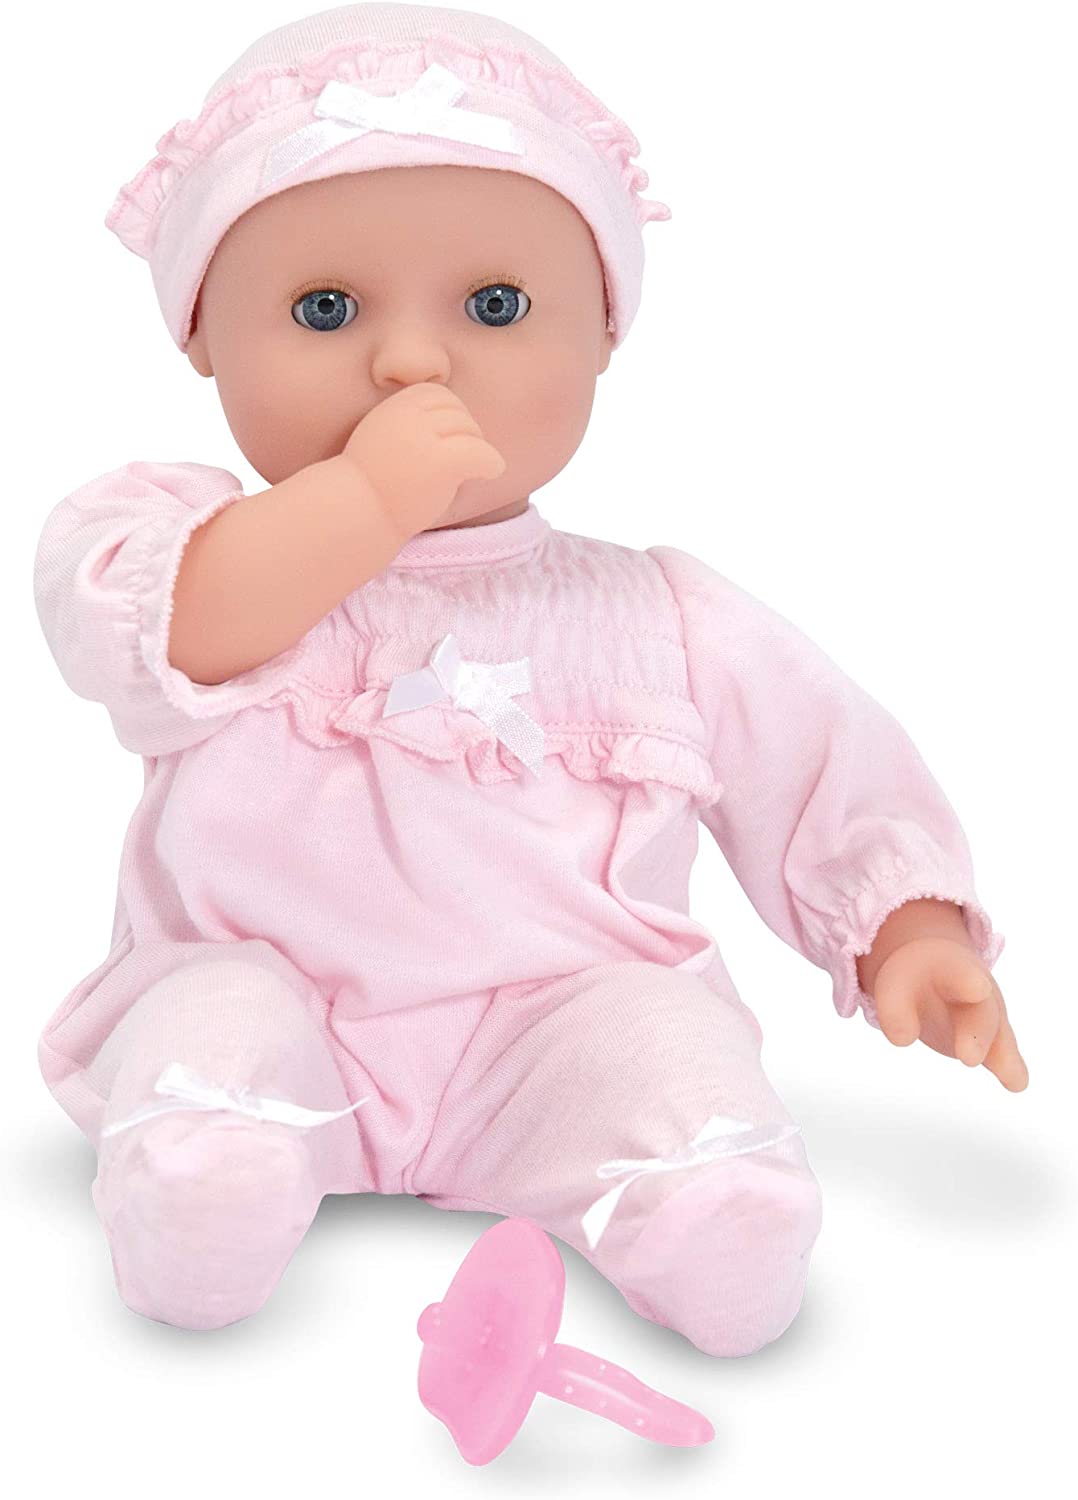 Best toys for 15 month old babies: Mine to Love Jenna doll